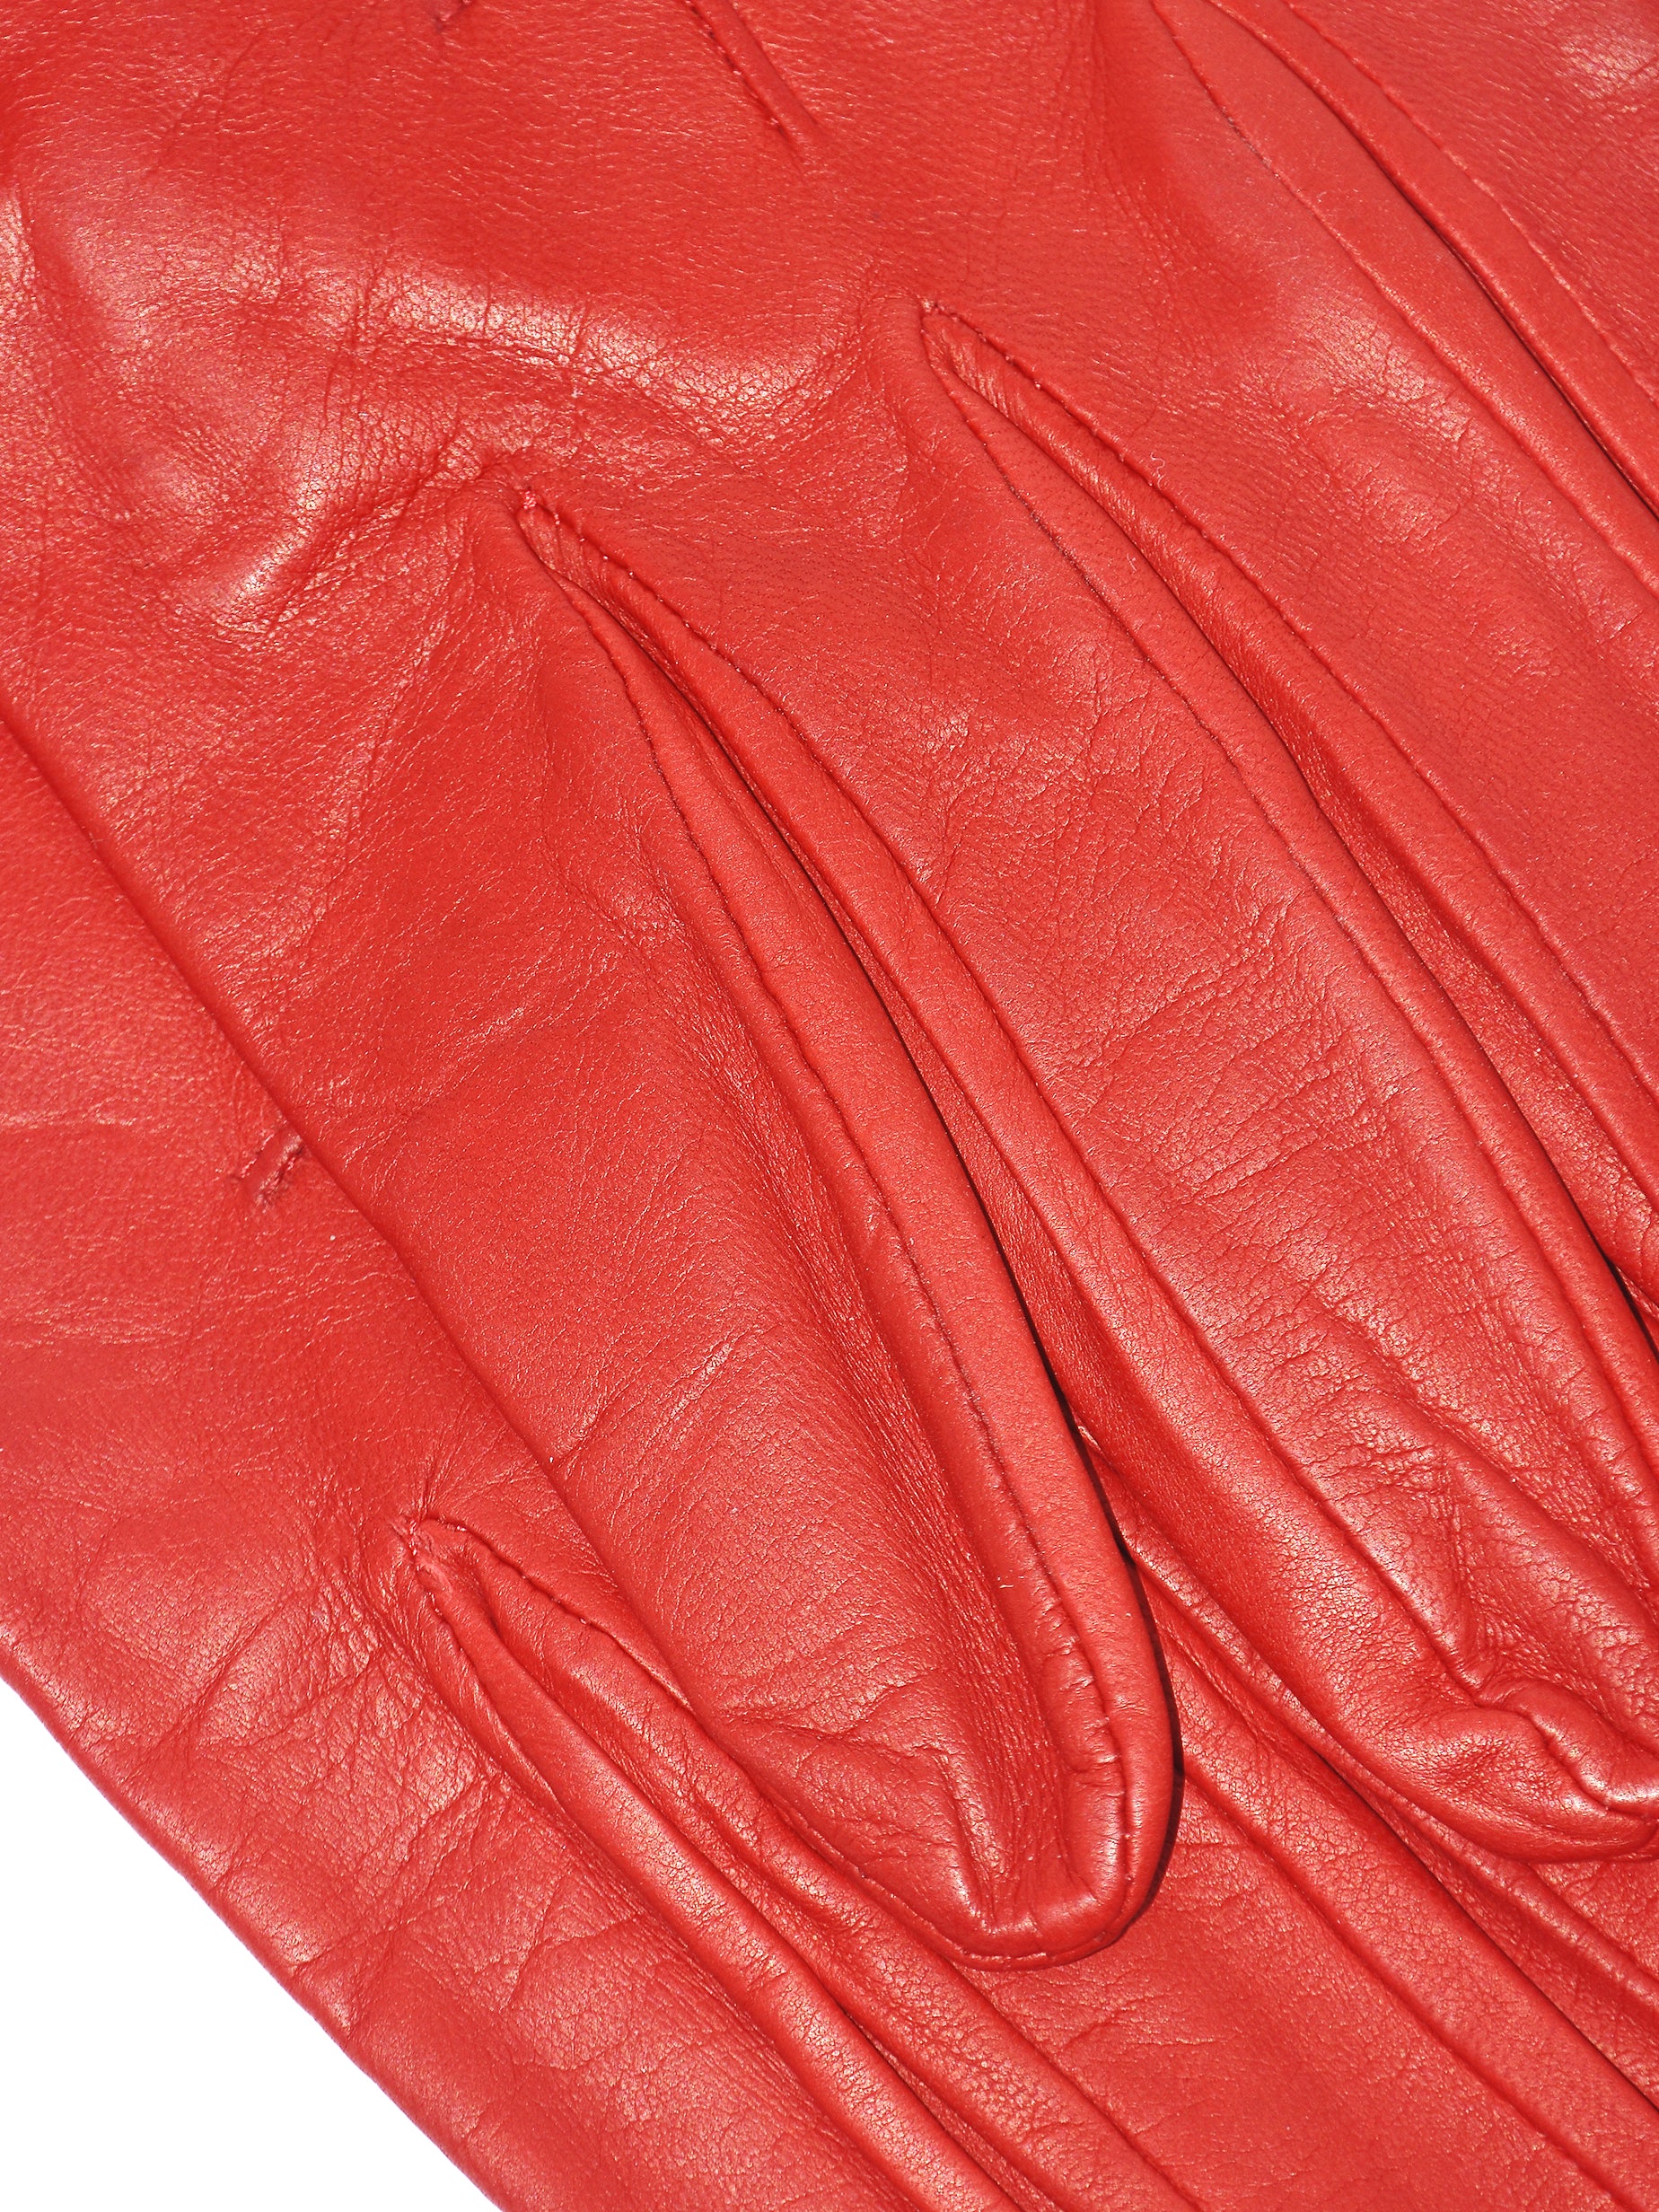 LEATHER GLOVES IN RED